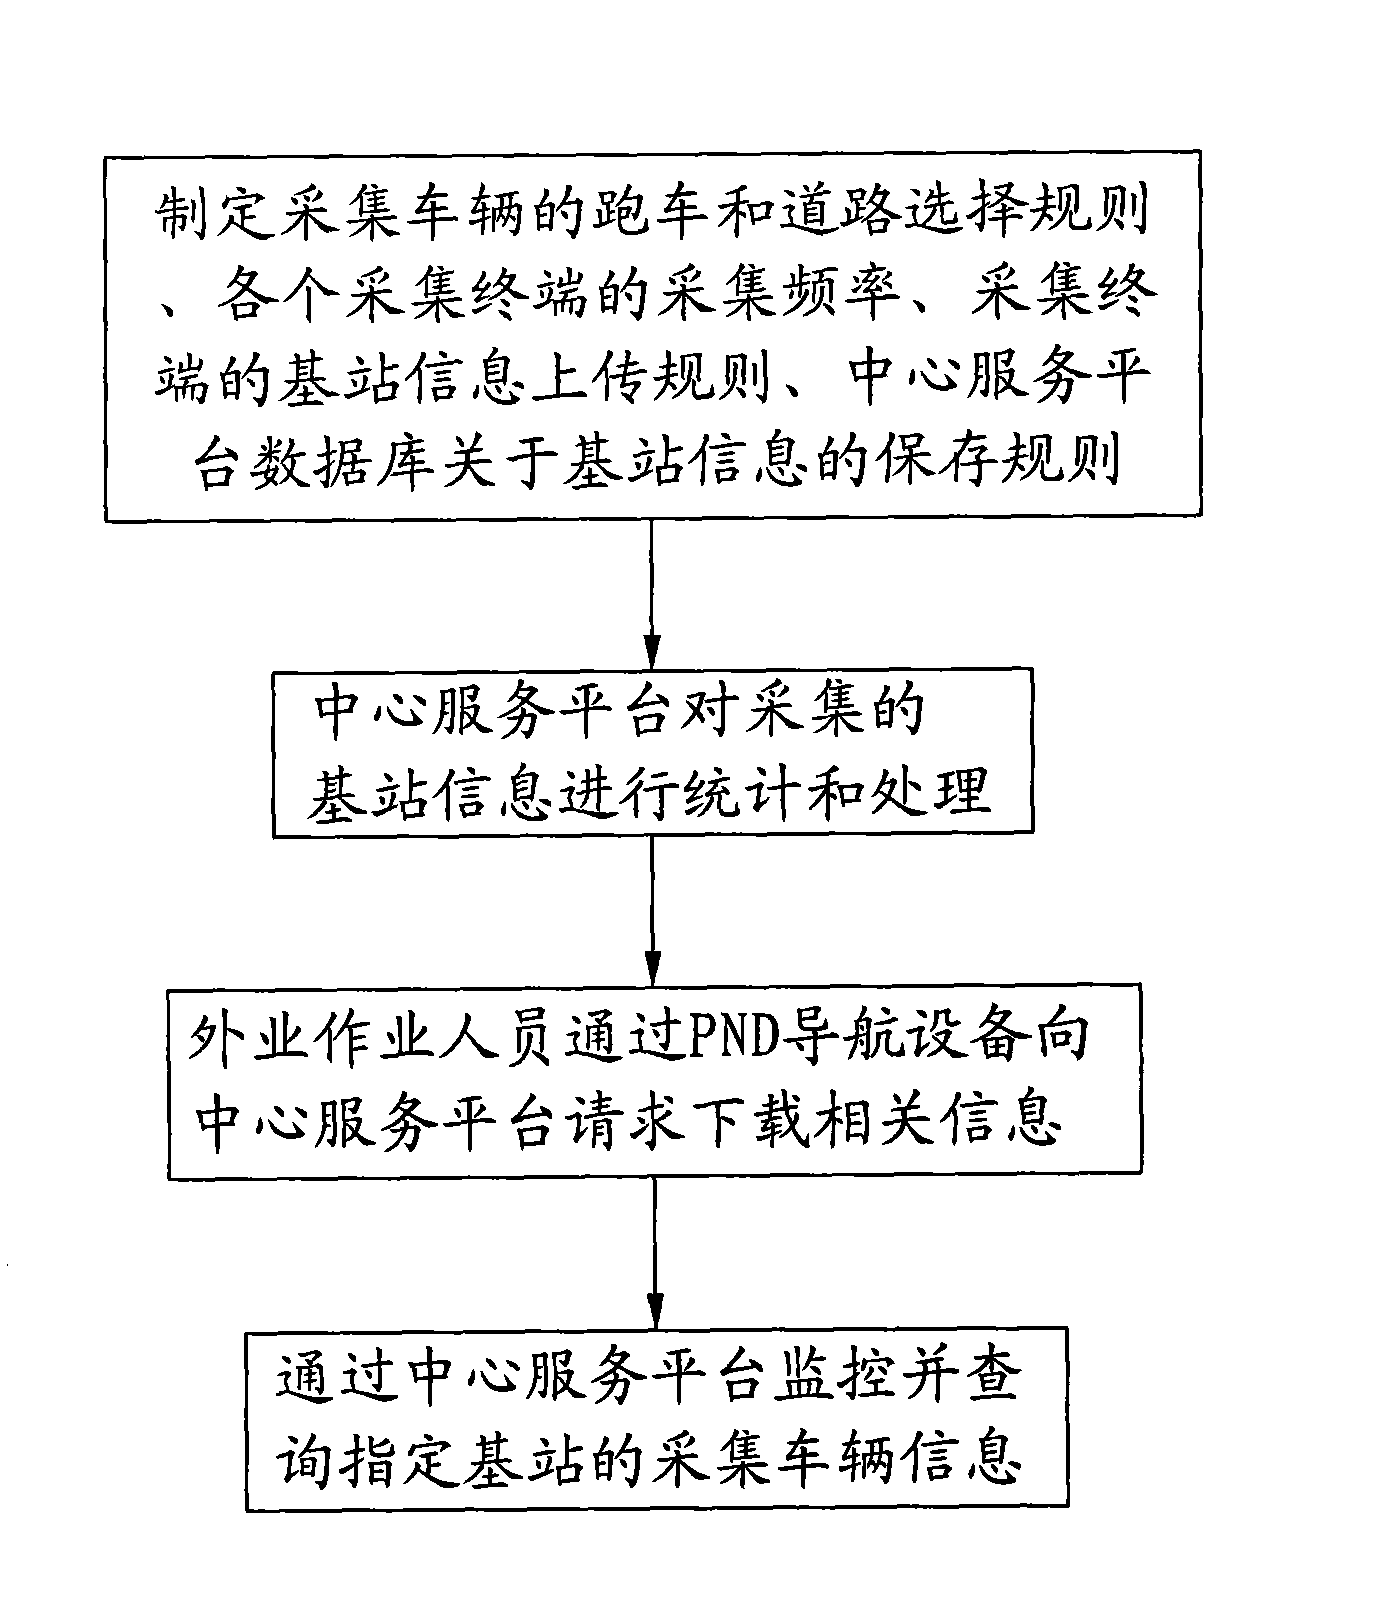 Base station information acquiring and processing method for base station positioning